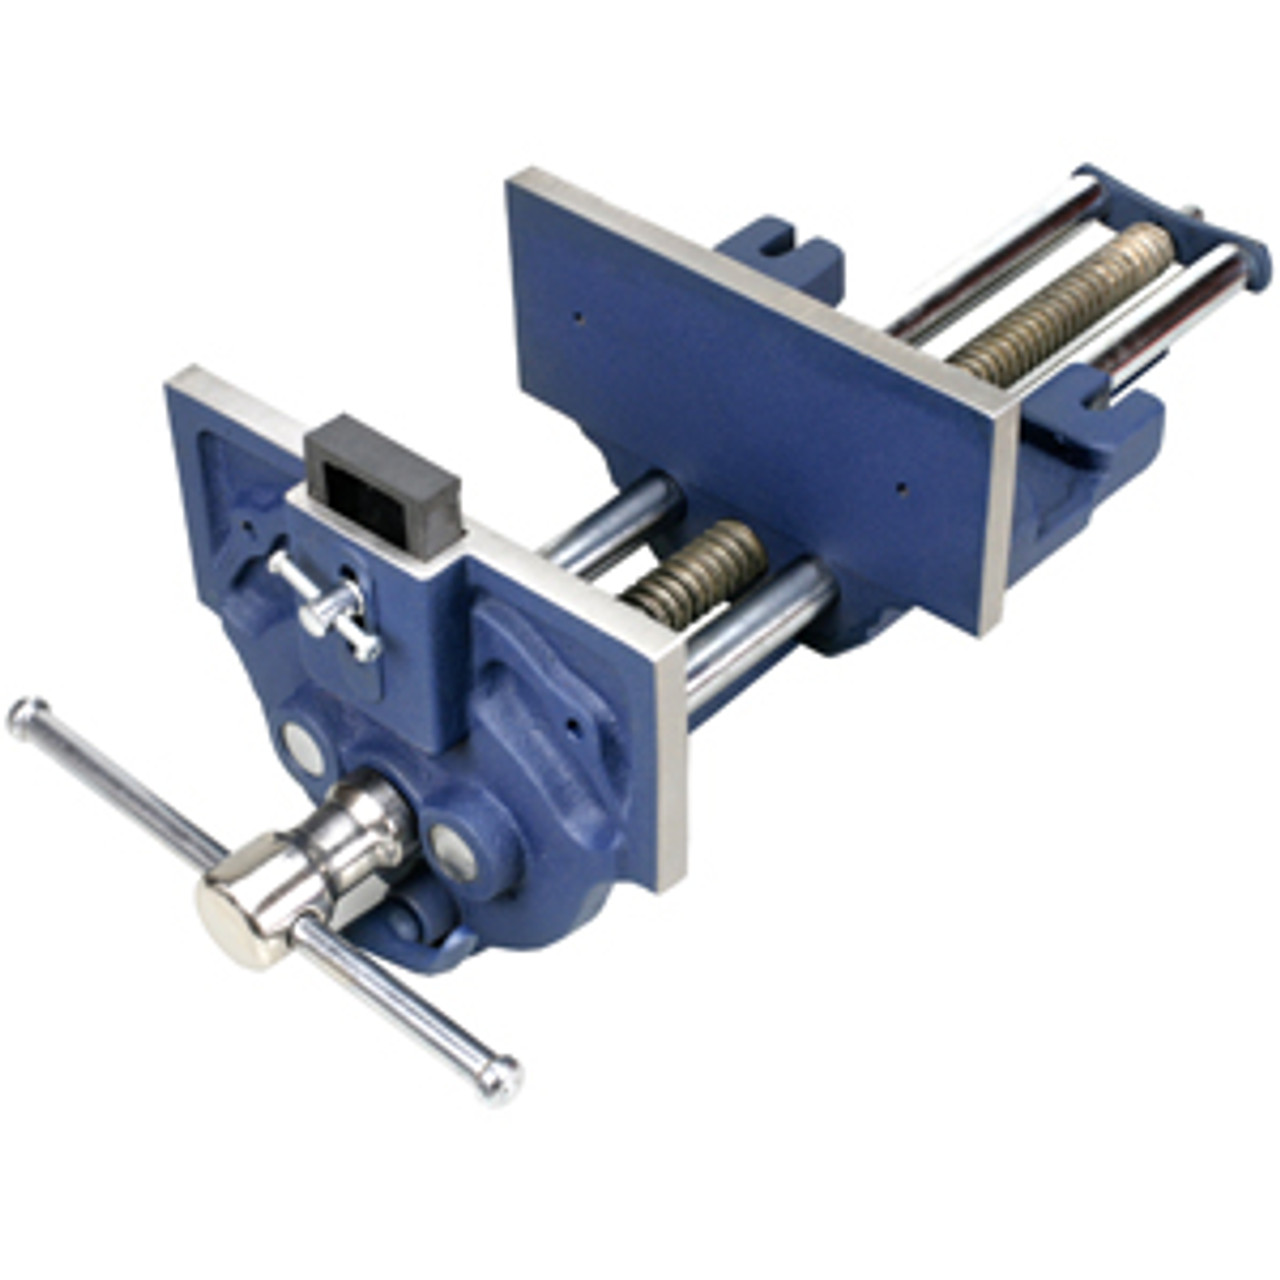 Buy Vise Woodworking 16in. Quick Release at Busy Bee Tools